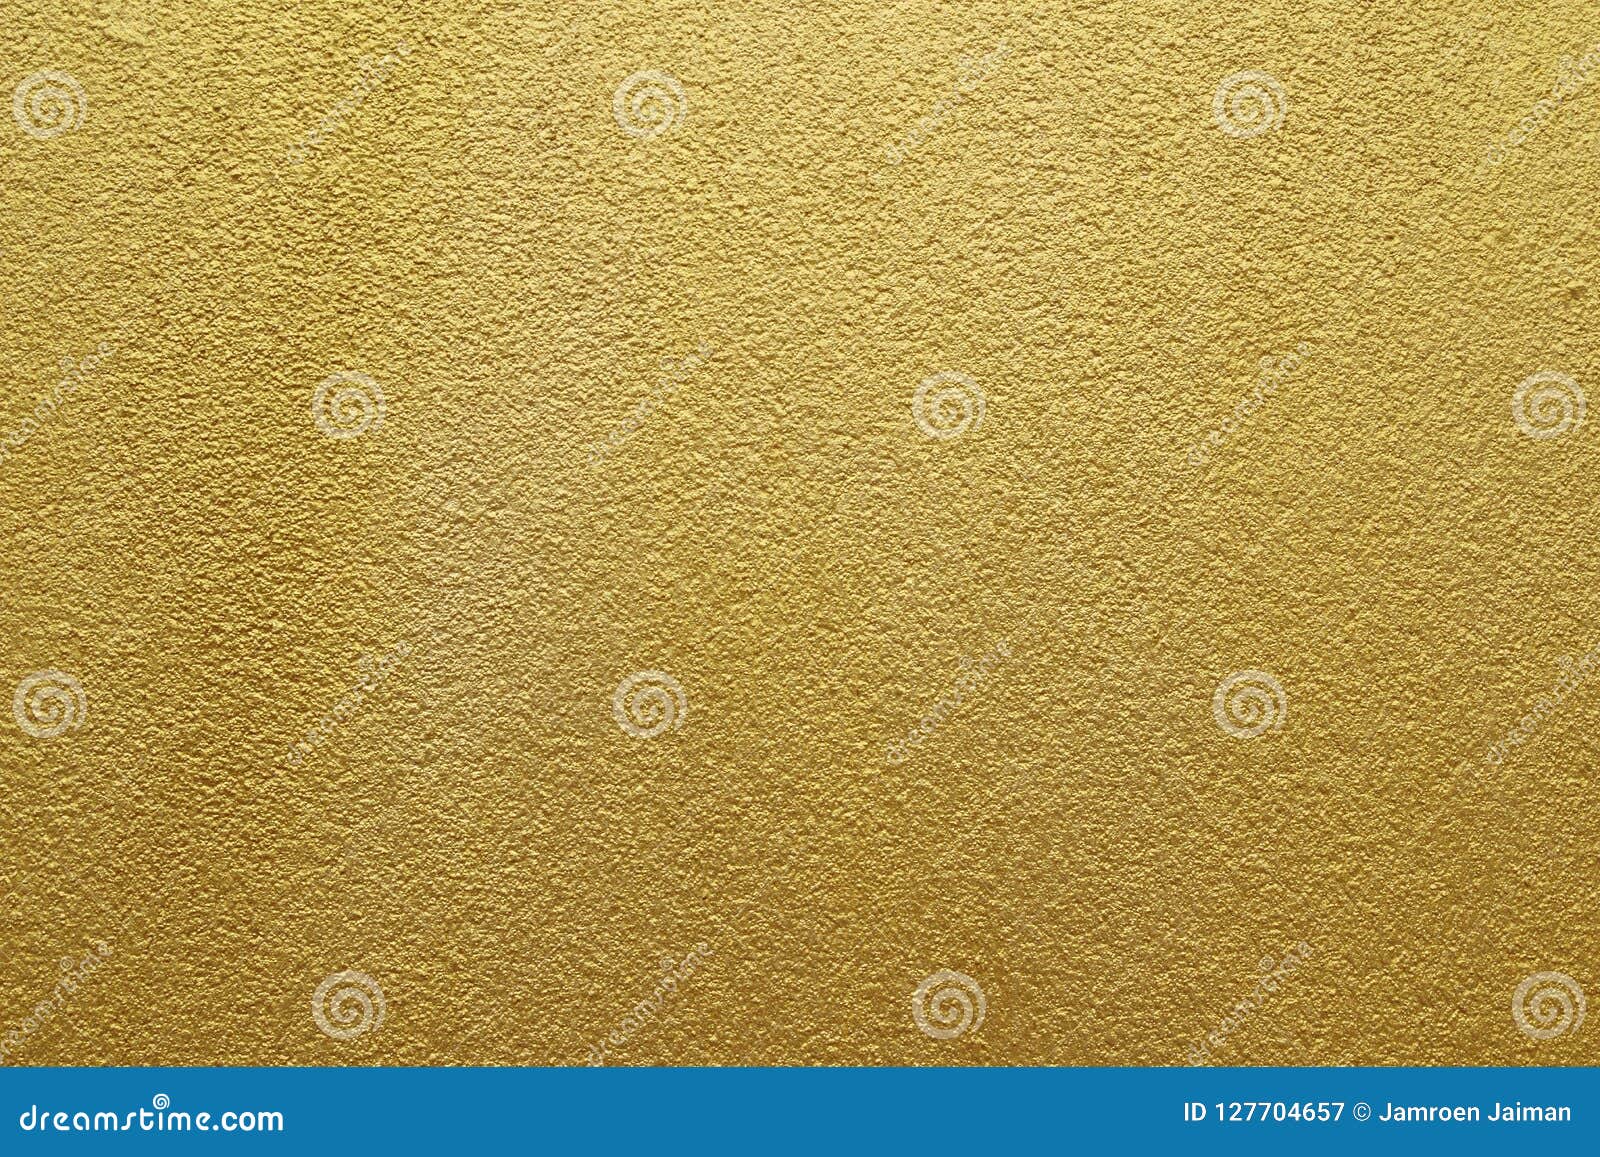 Shiny Yellow Leaf Gold of Wall Texture Background Stock Image - Image